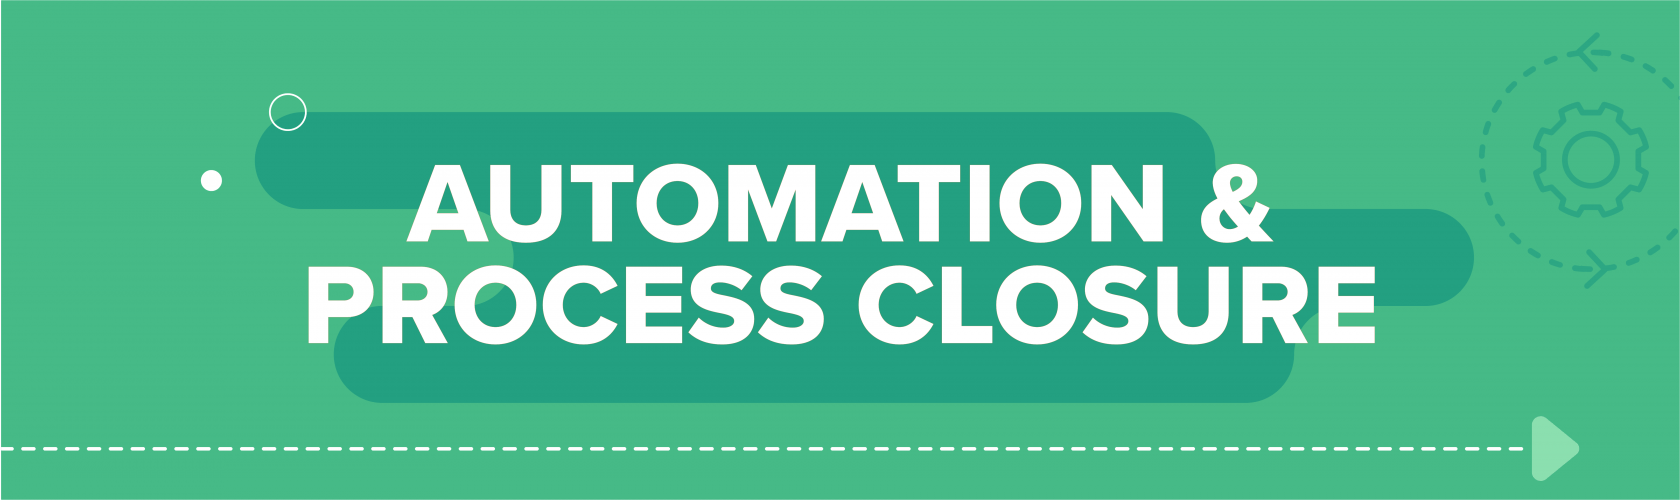 Automation and Process Closure